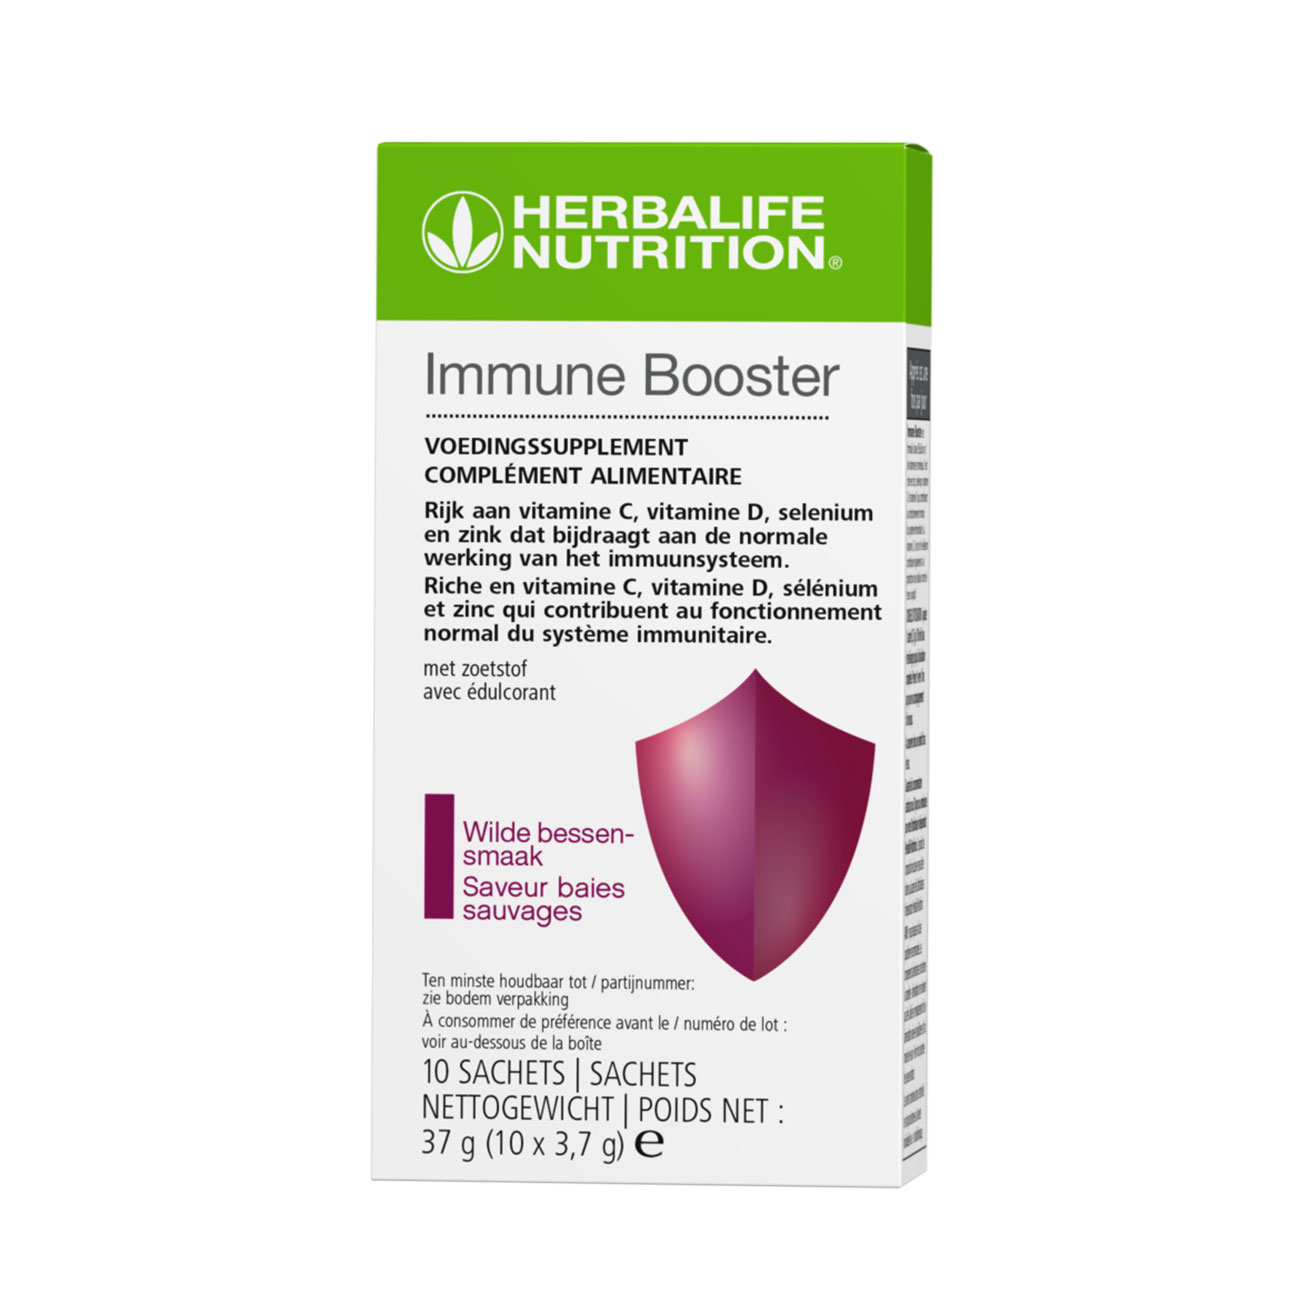 Immune booster Complément alimentaire Baies sauvages product shot